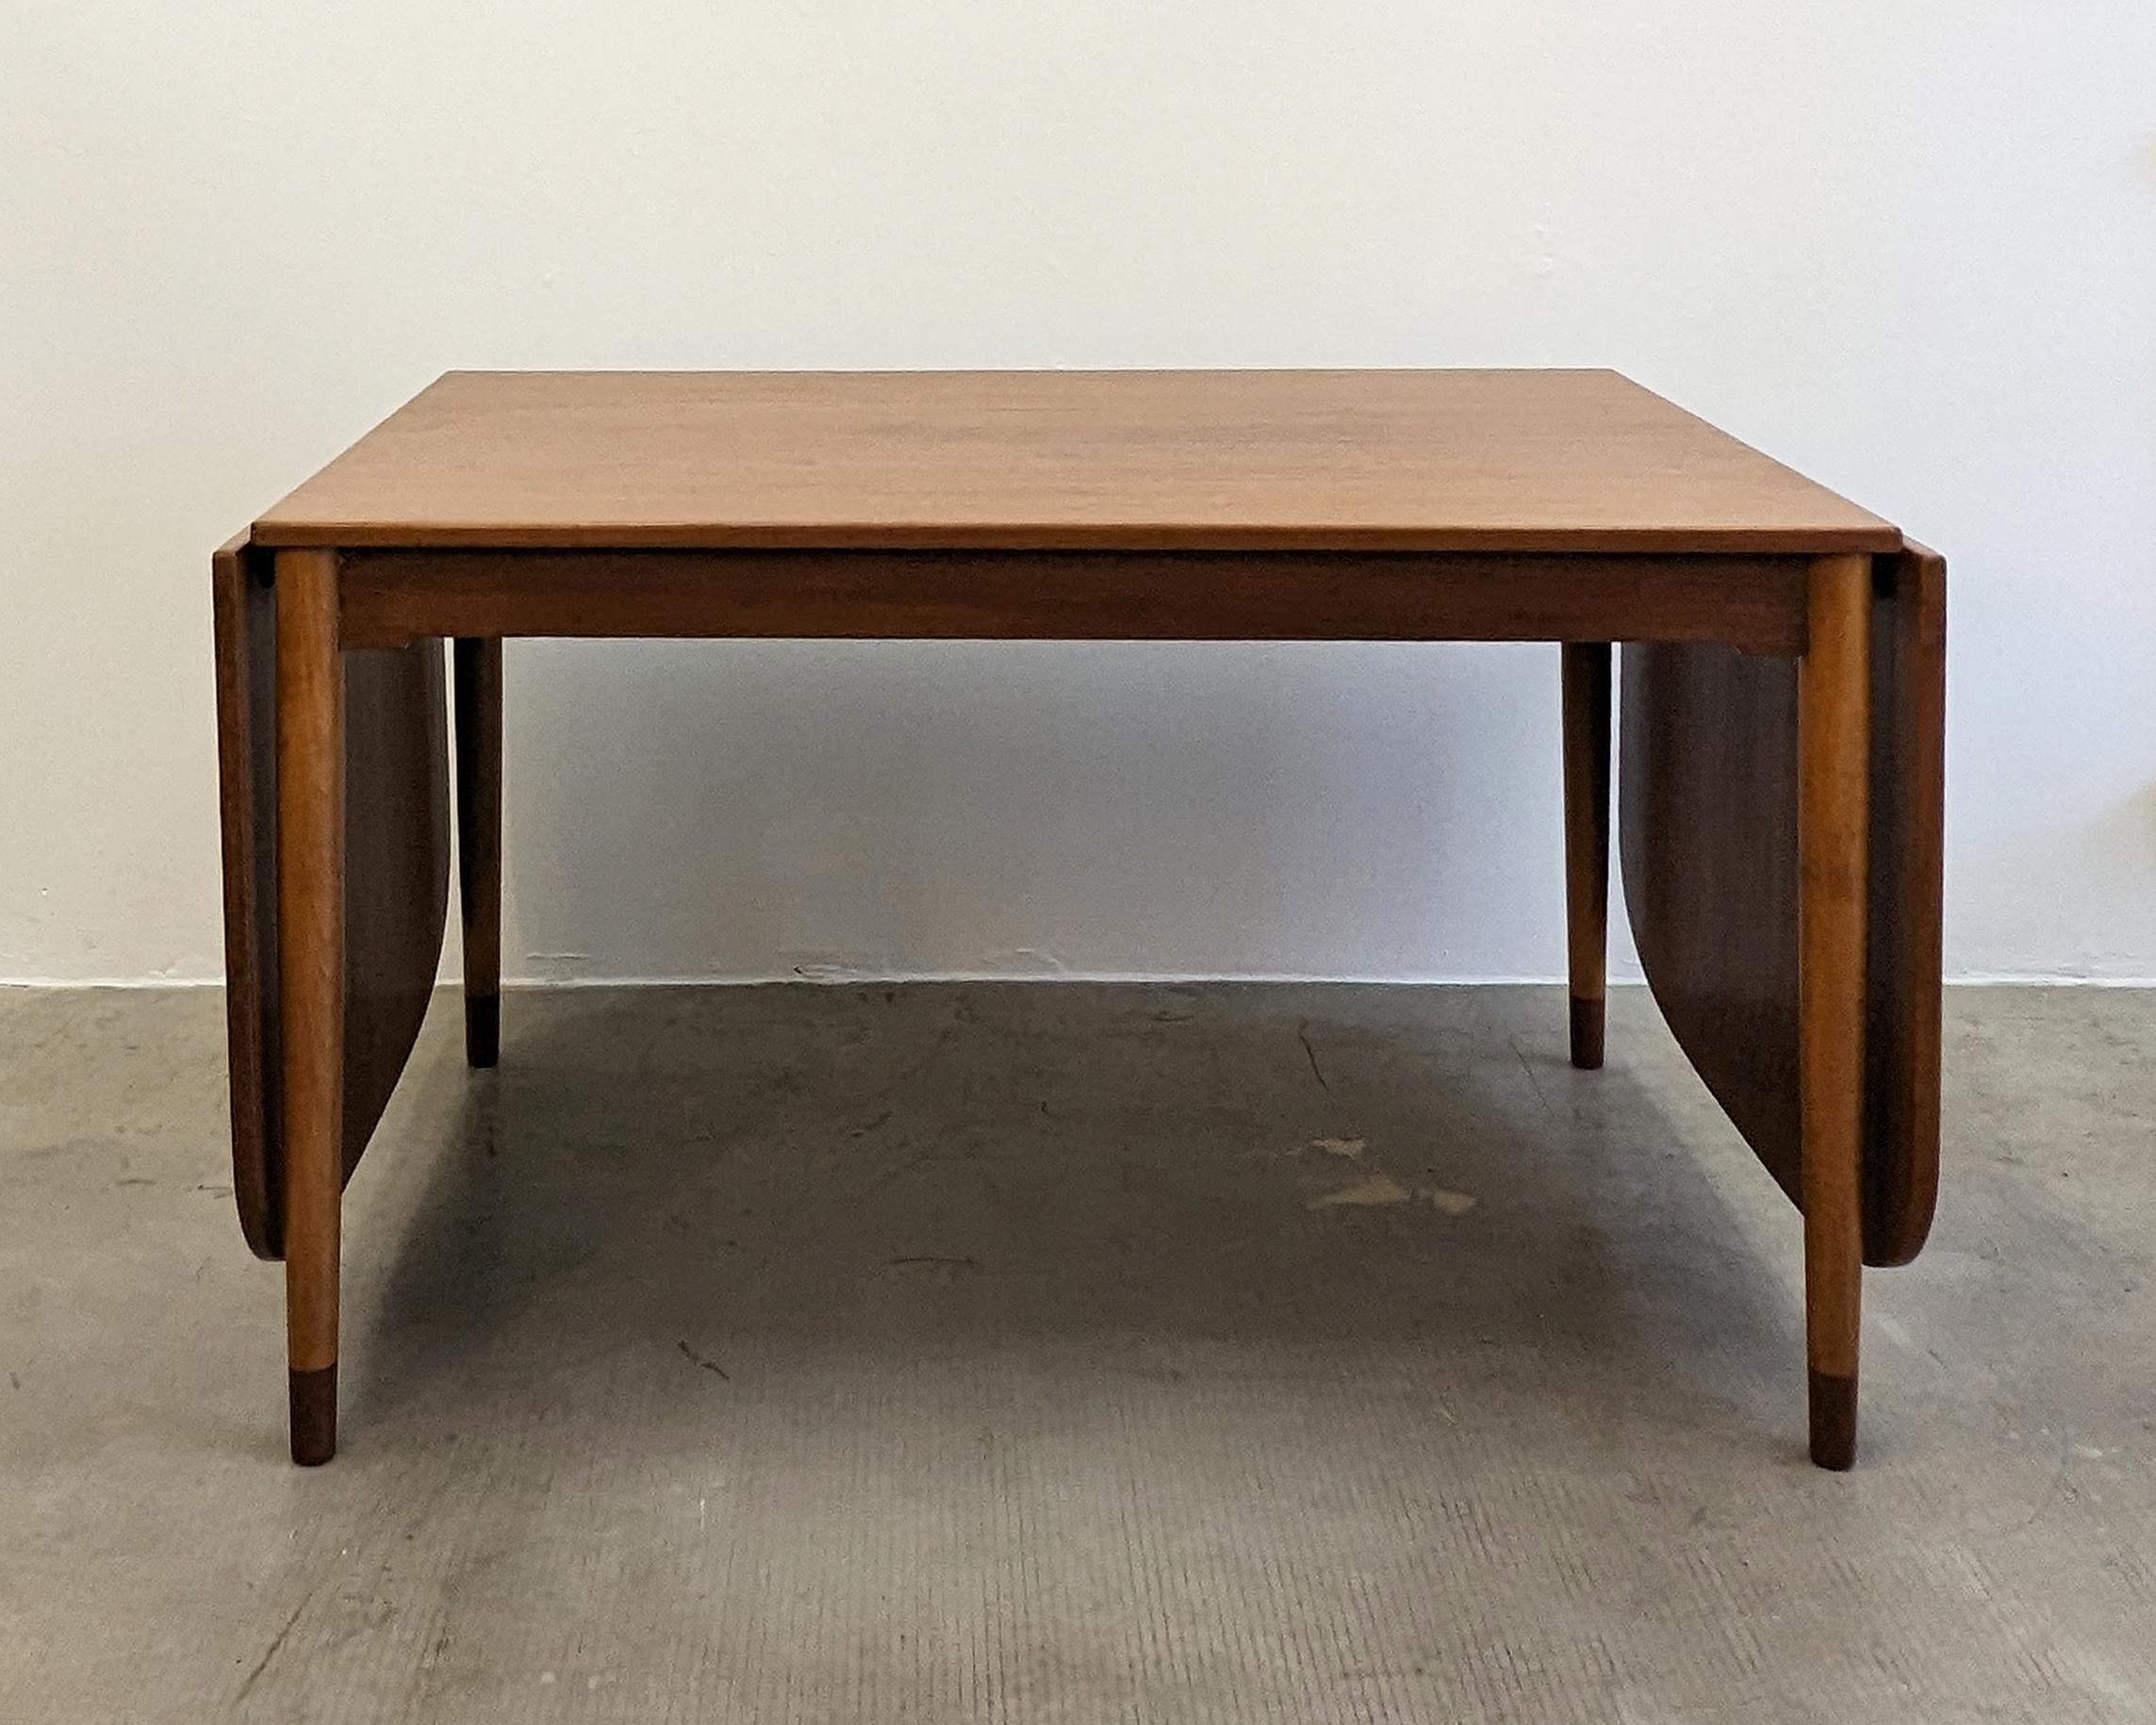 Børge Mogensen, Denmark (designer)

Dining table, c. 1960
Manufactured by Søborg Møbelfabrik, Denmark.

Teak with brass fittings.
Two end-hung leaves that can be independently raised, and can also be removed to store.

Beautiful condition. The table